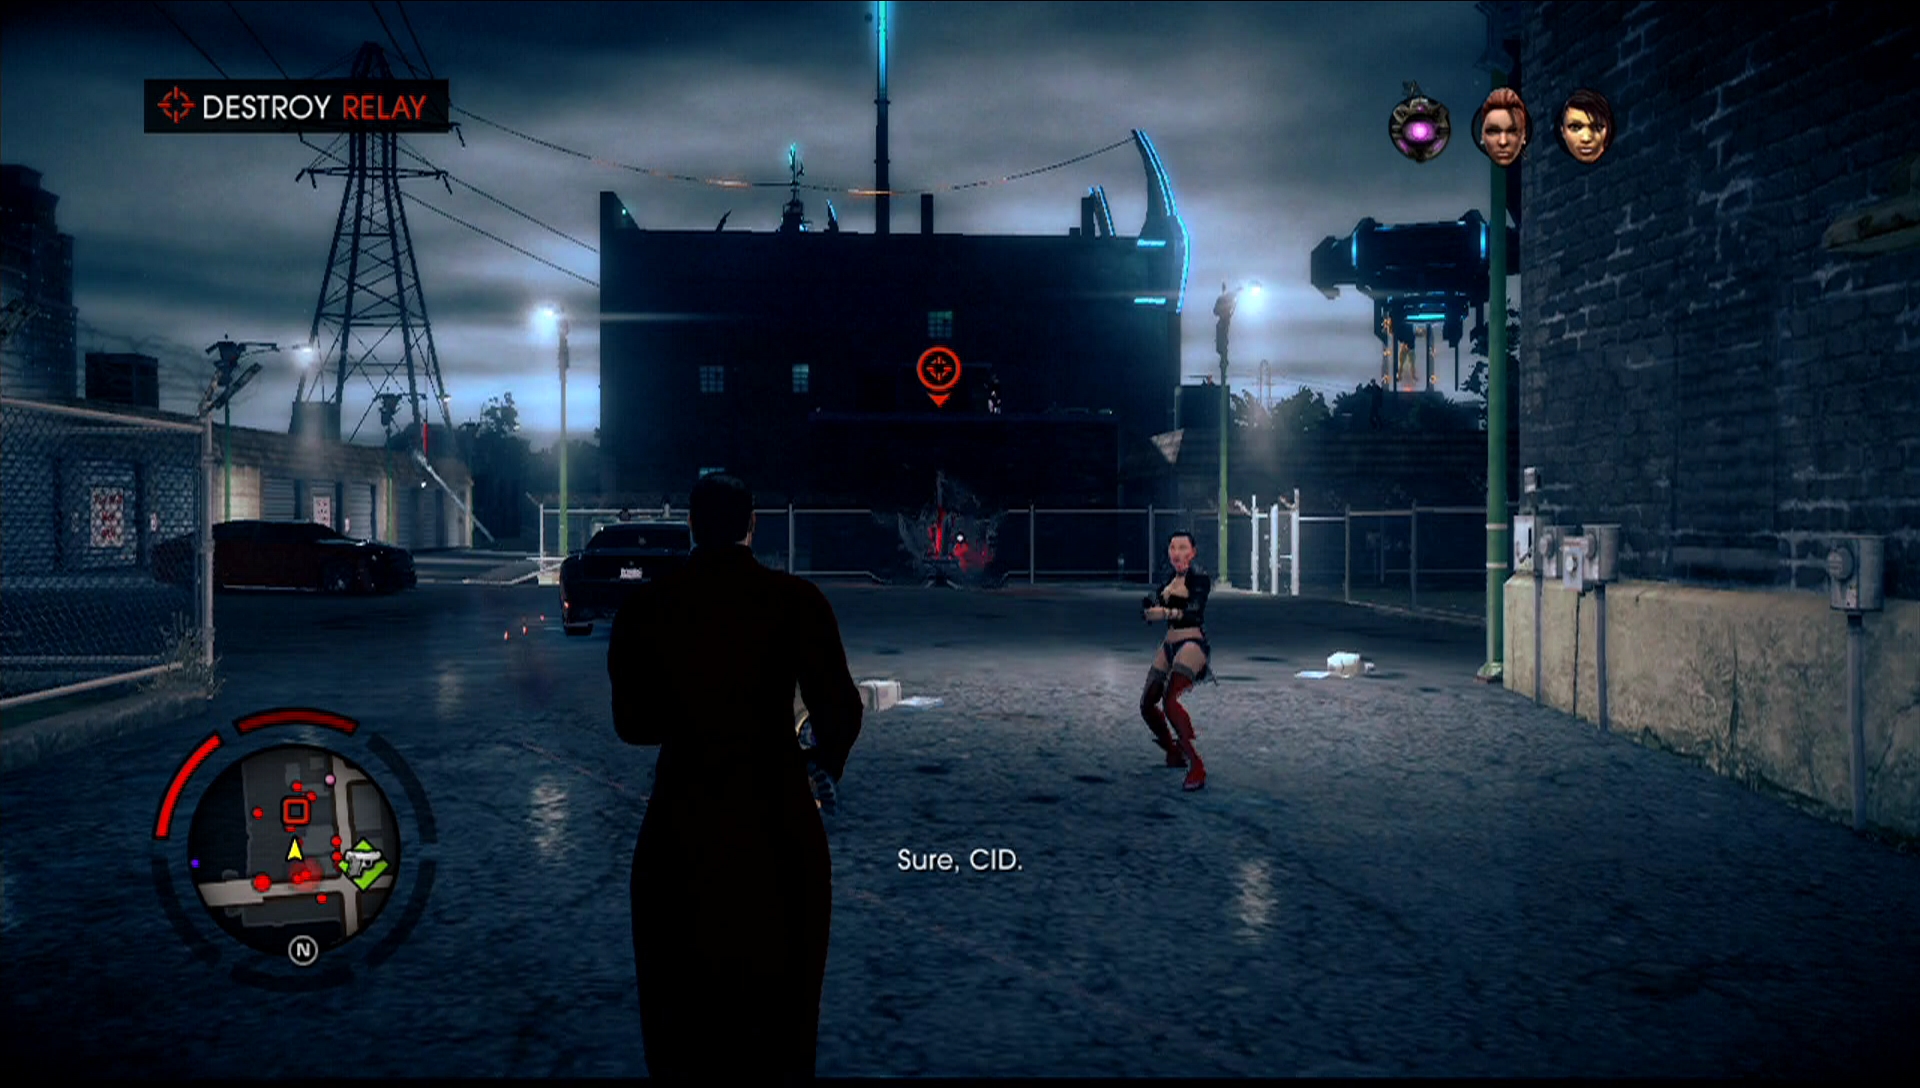 Game On: Saints Row IV – Objection Network